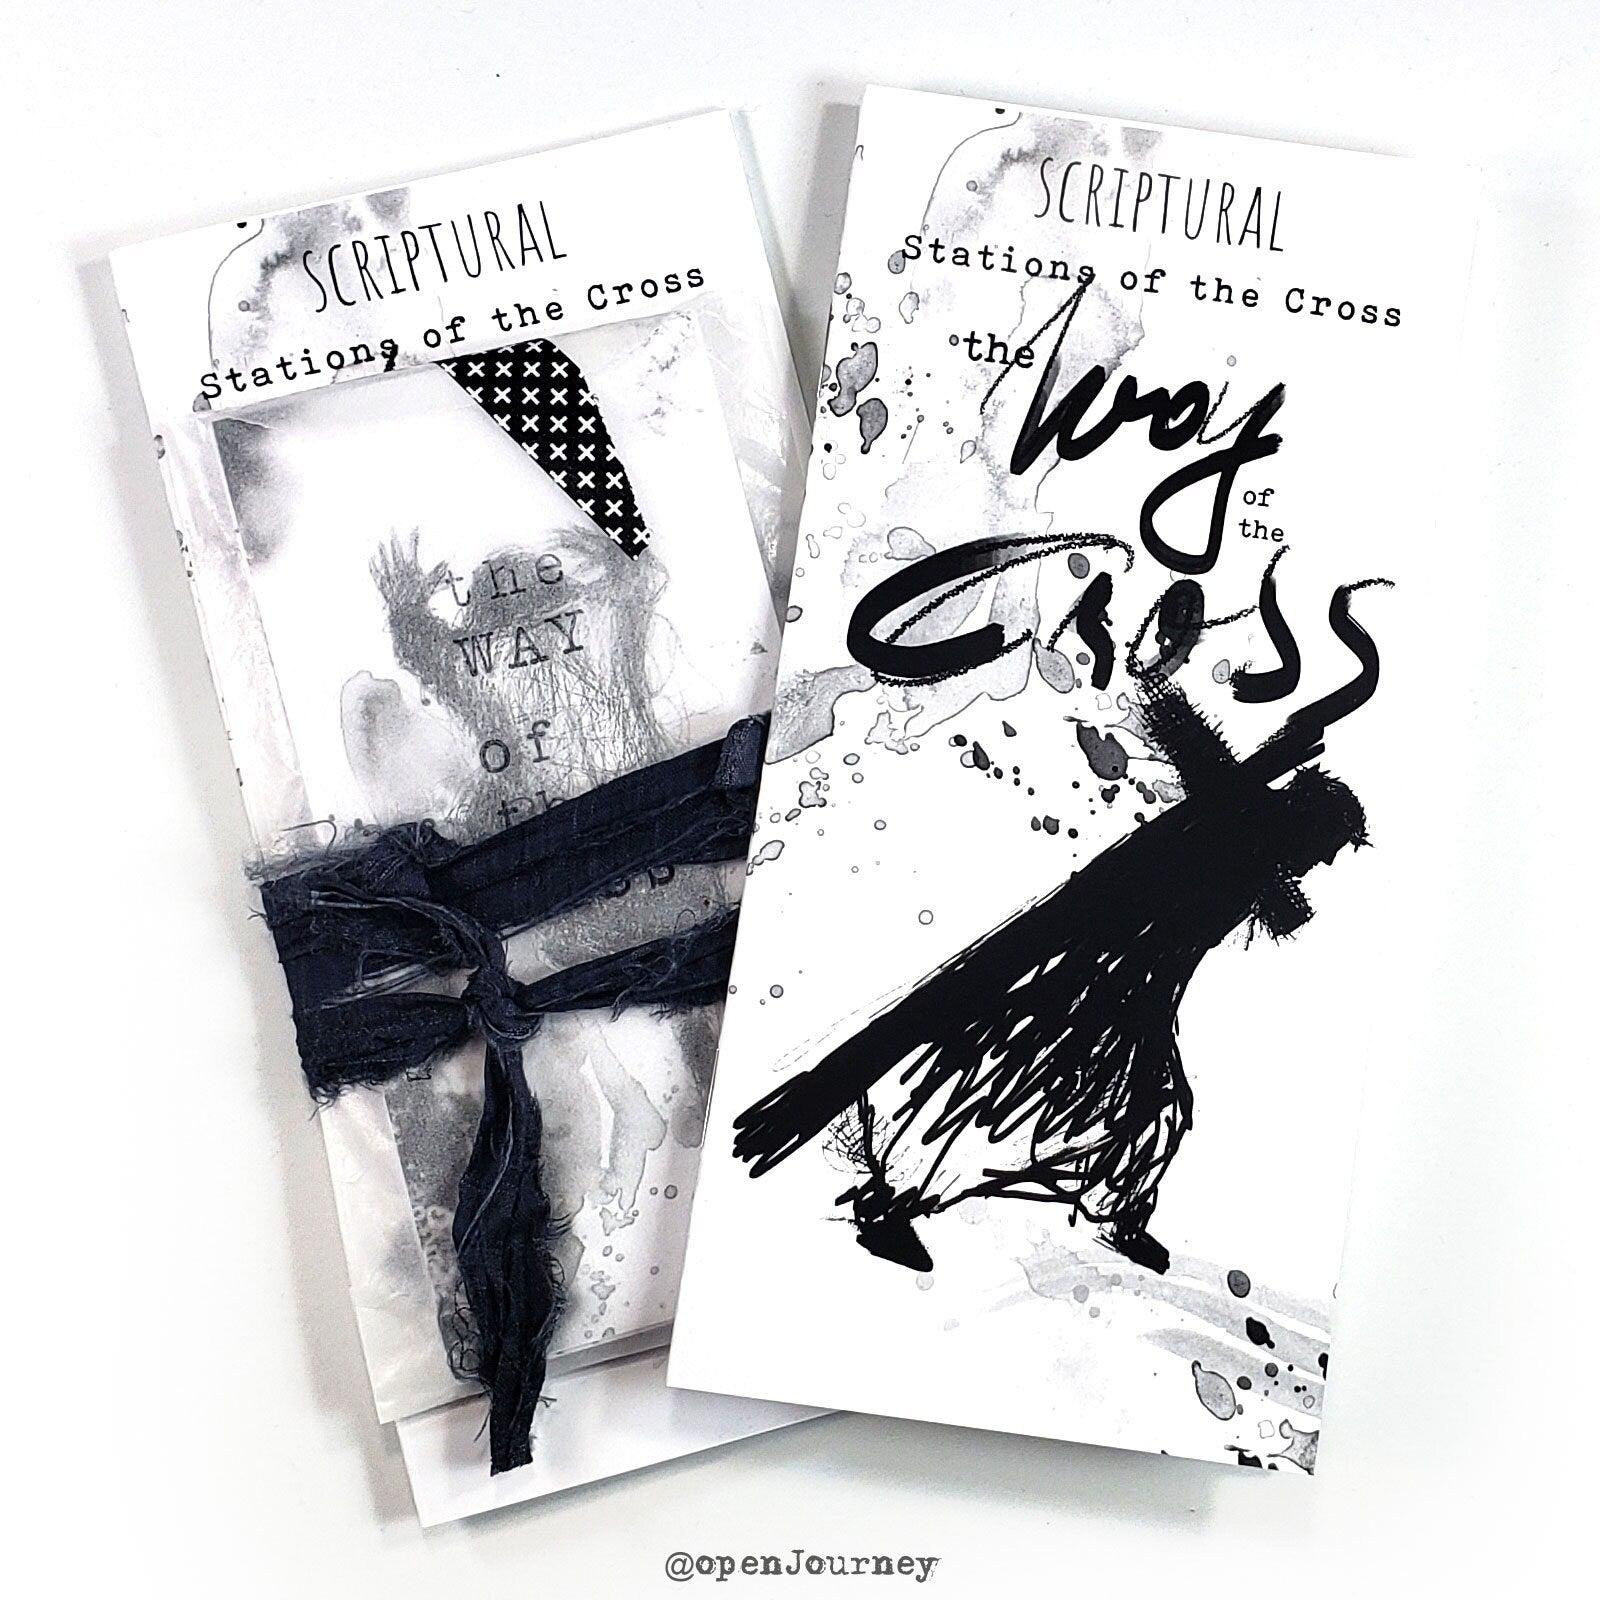 Scriptural Stations of the Cross - a Bible journaling creative devotional kit